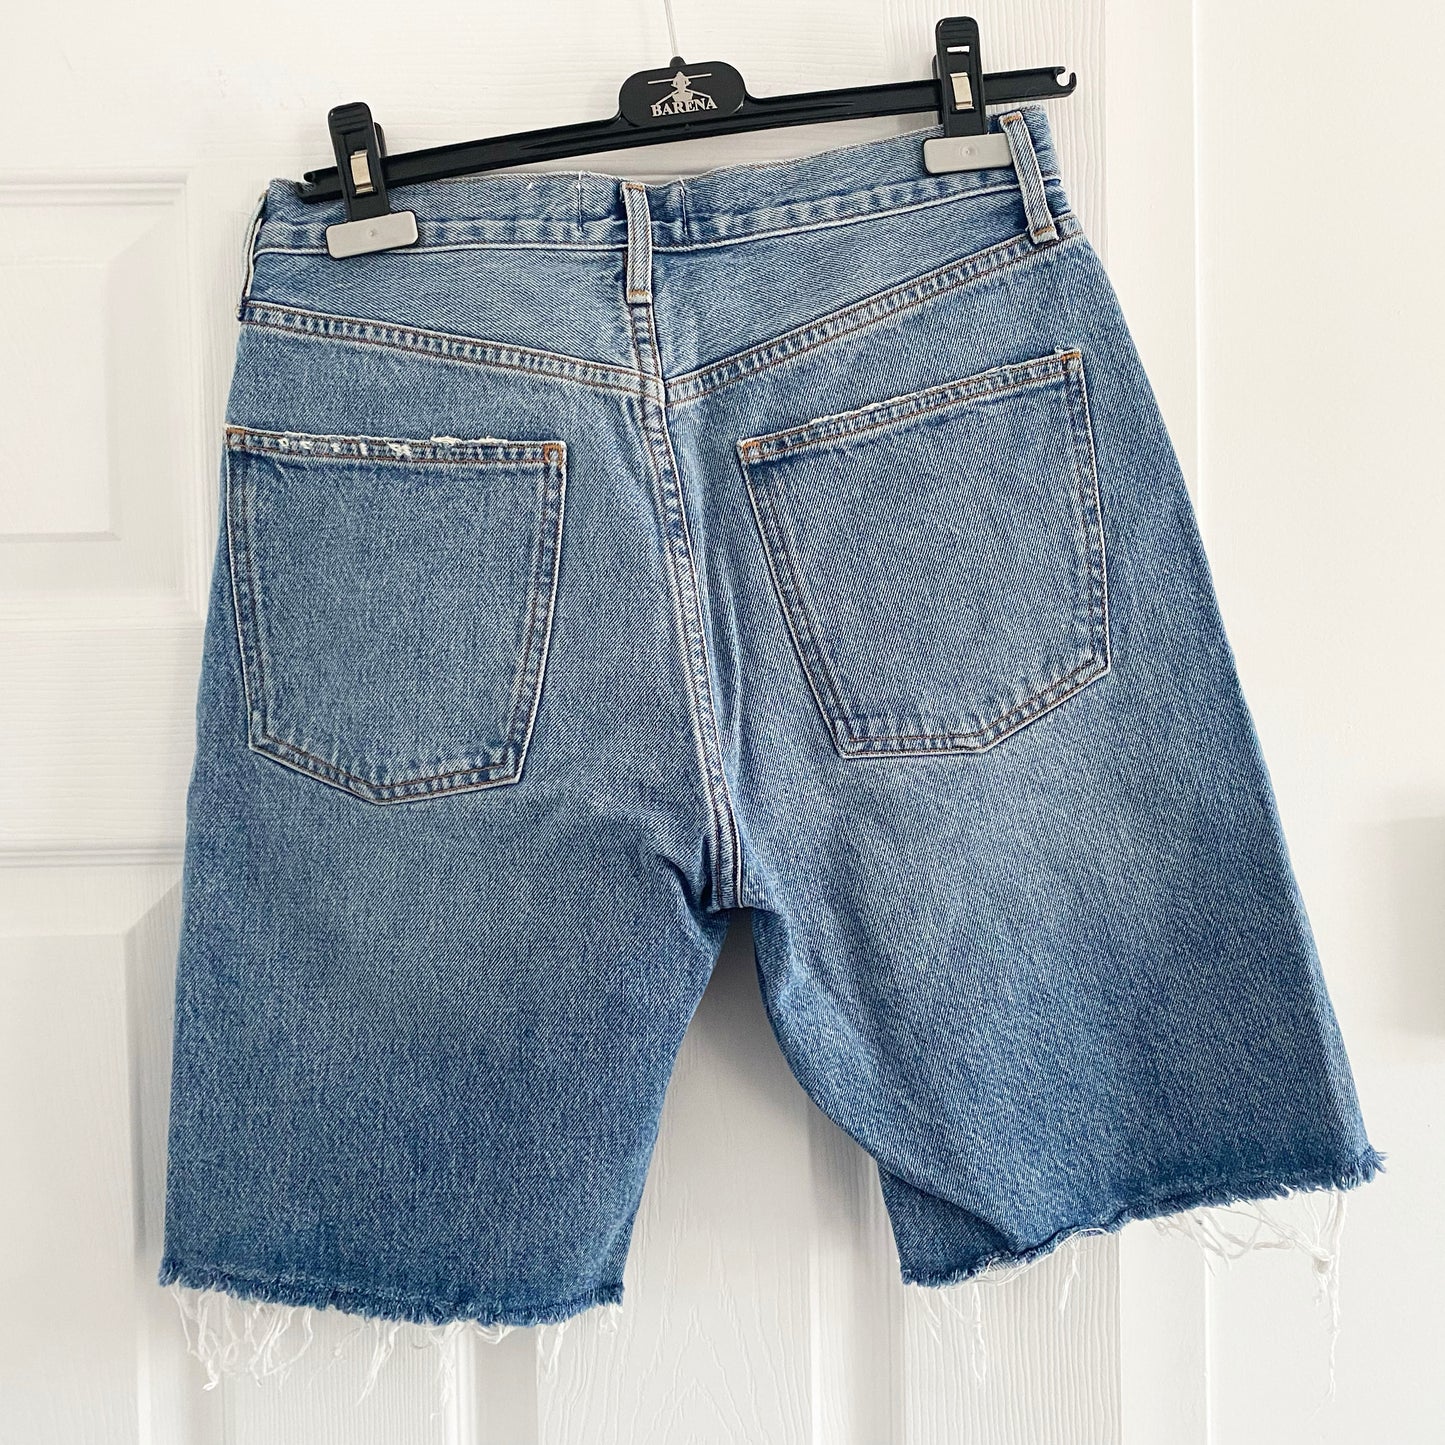 AGOLDE 90's Denim Shorts in "Runabout", size 27